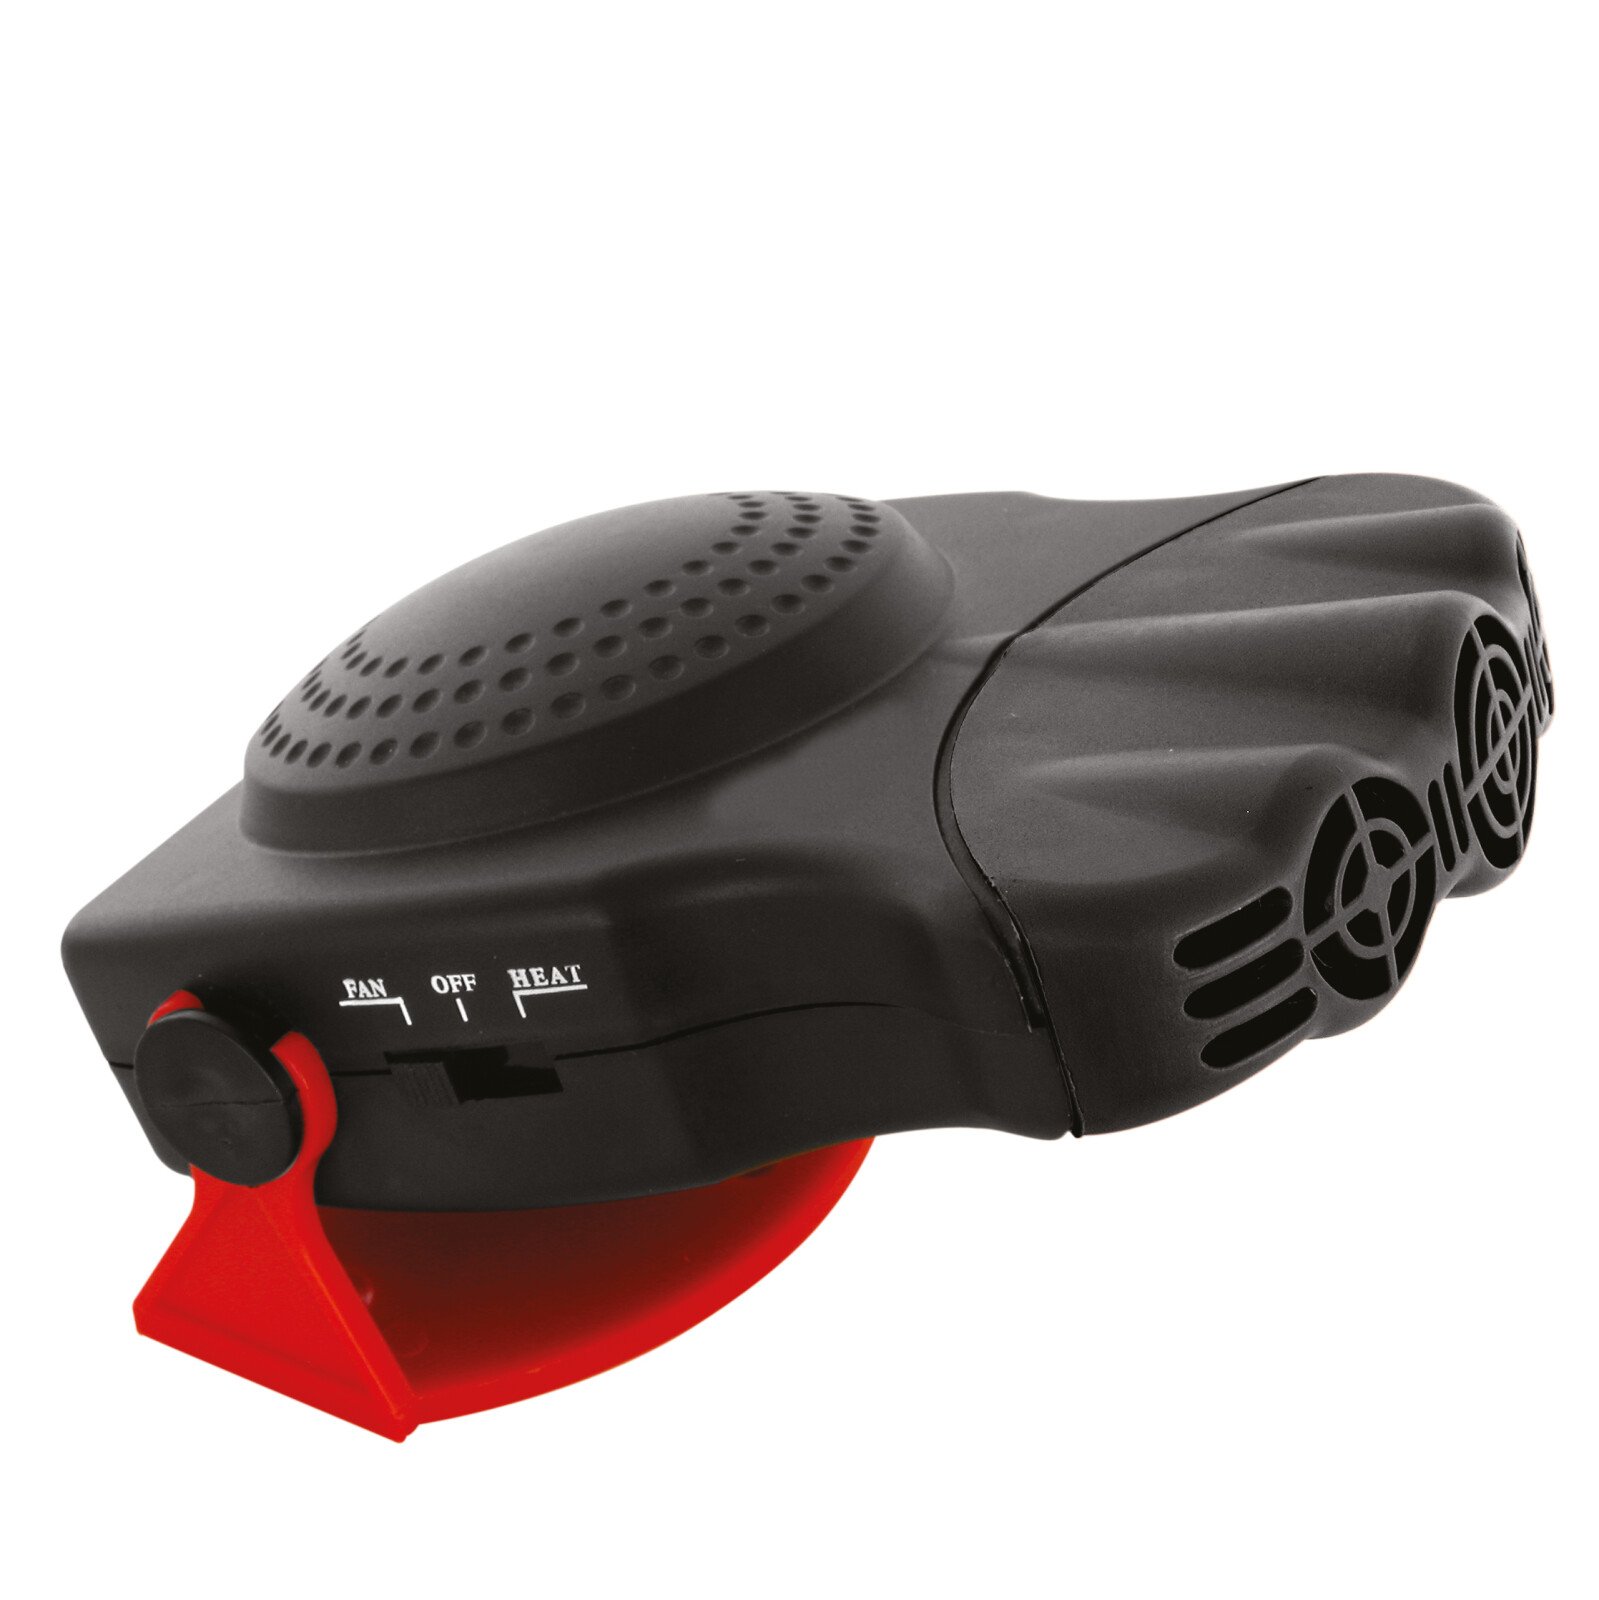 Heater / defroster 12V 150 W thumb